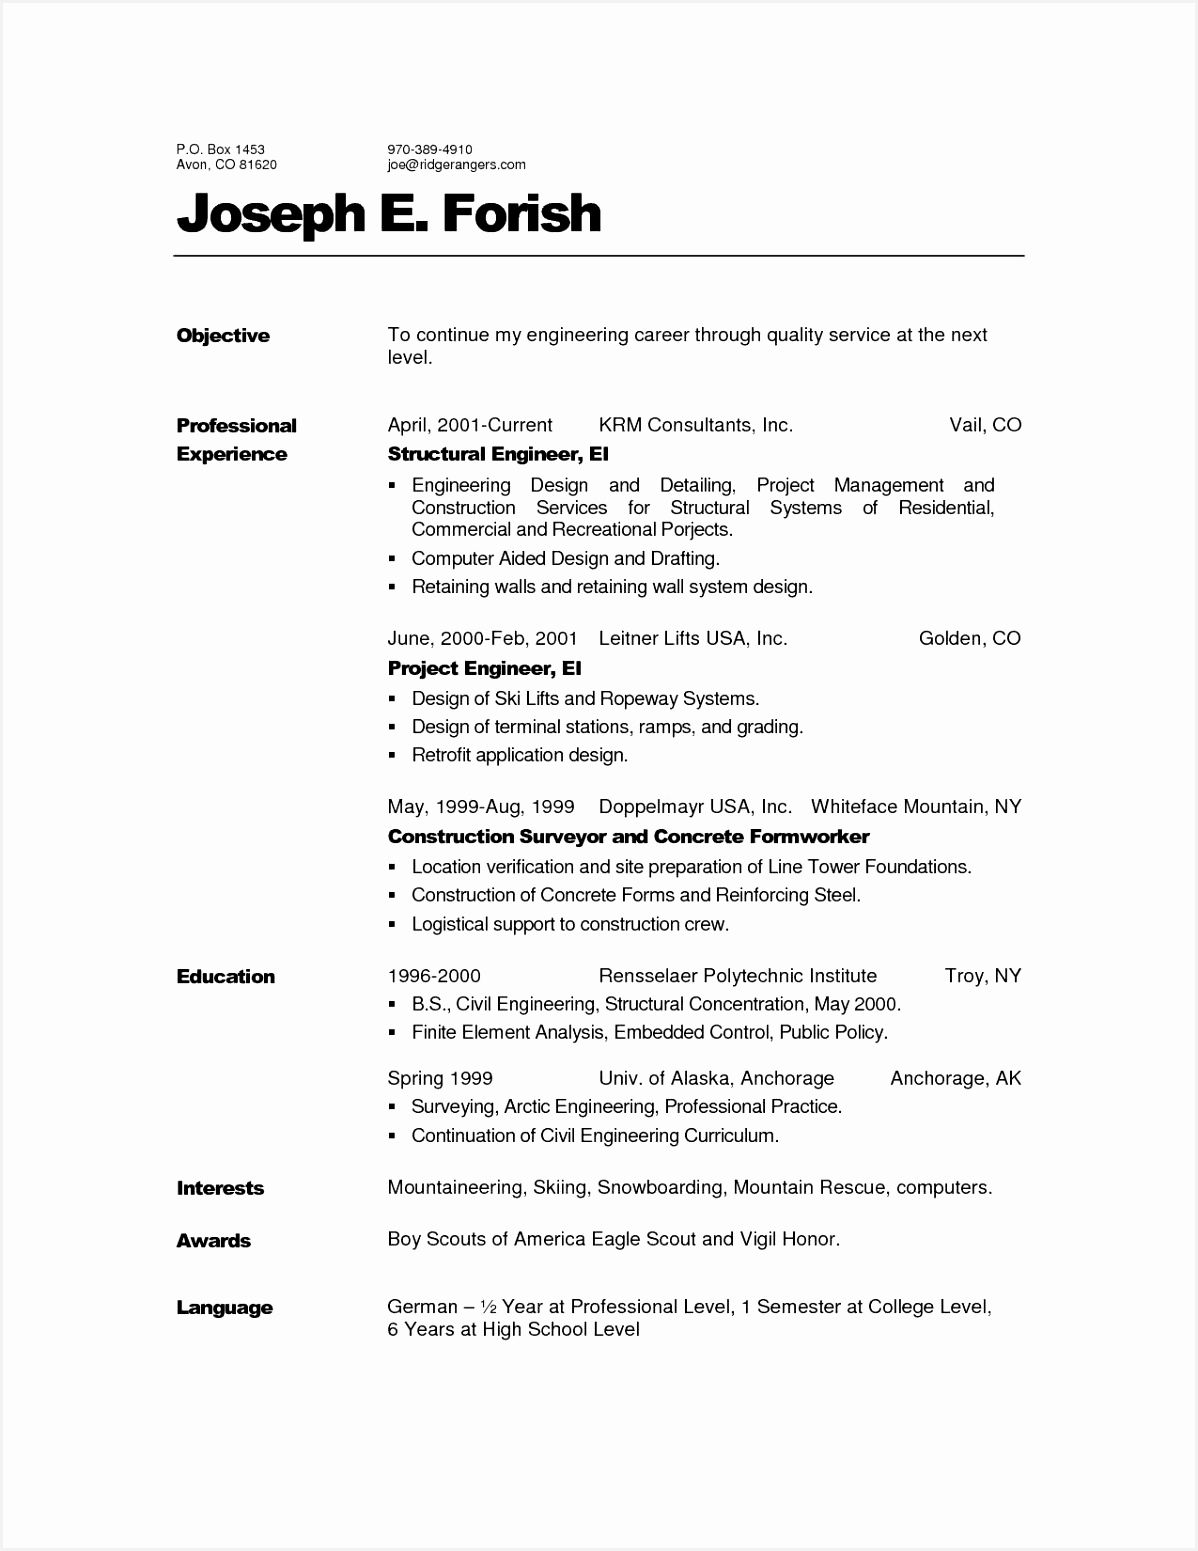 cfo resume template inspirational actor resumes 0d letter templates of letter from santa free template word 155111981hIsd